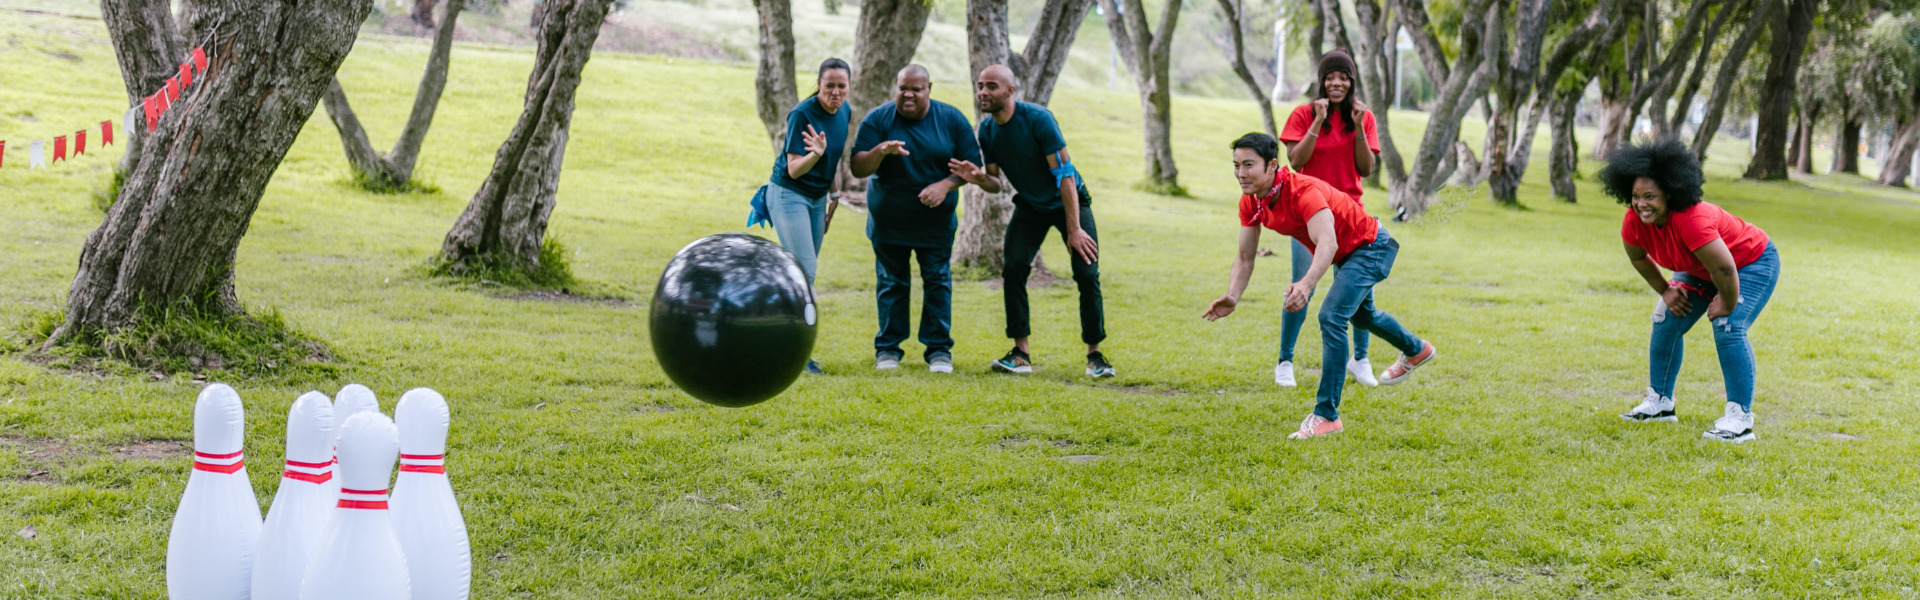 Group of adults playing a lawn bowling game